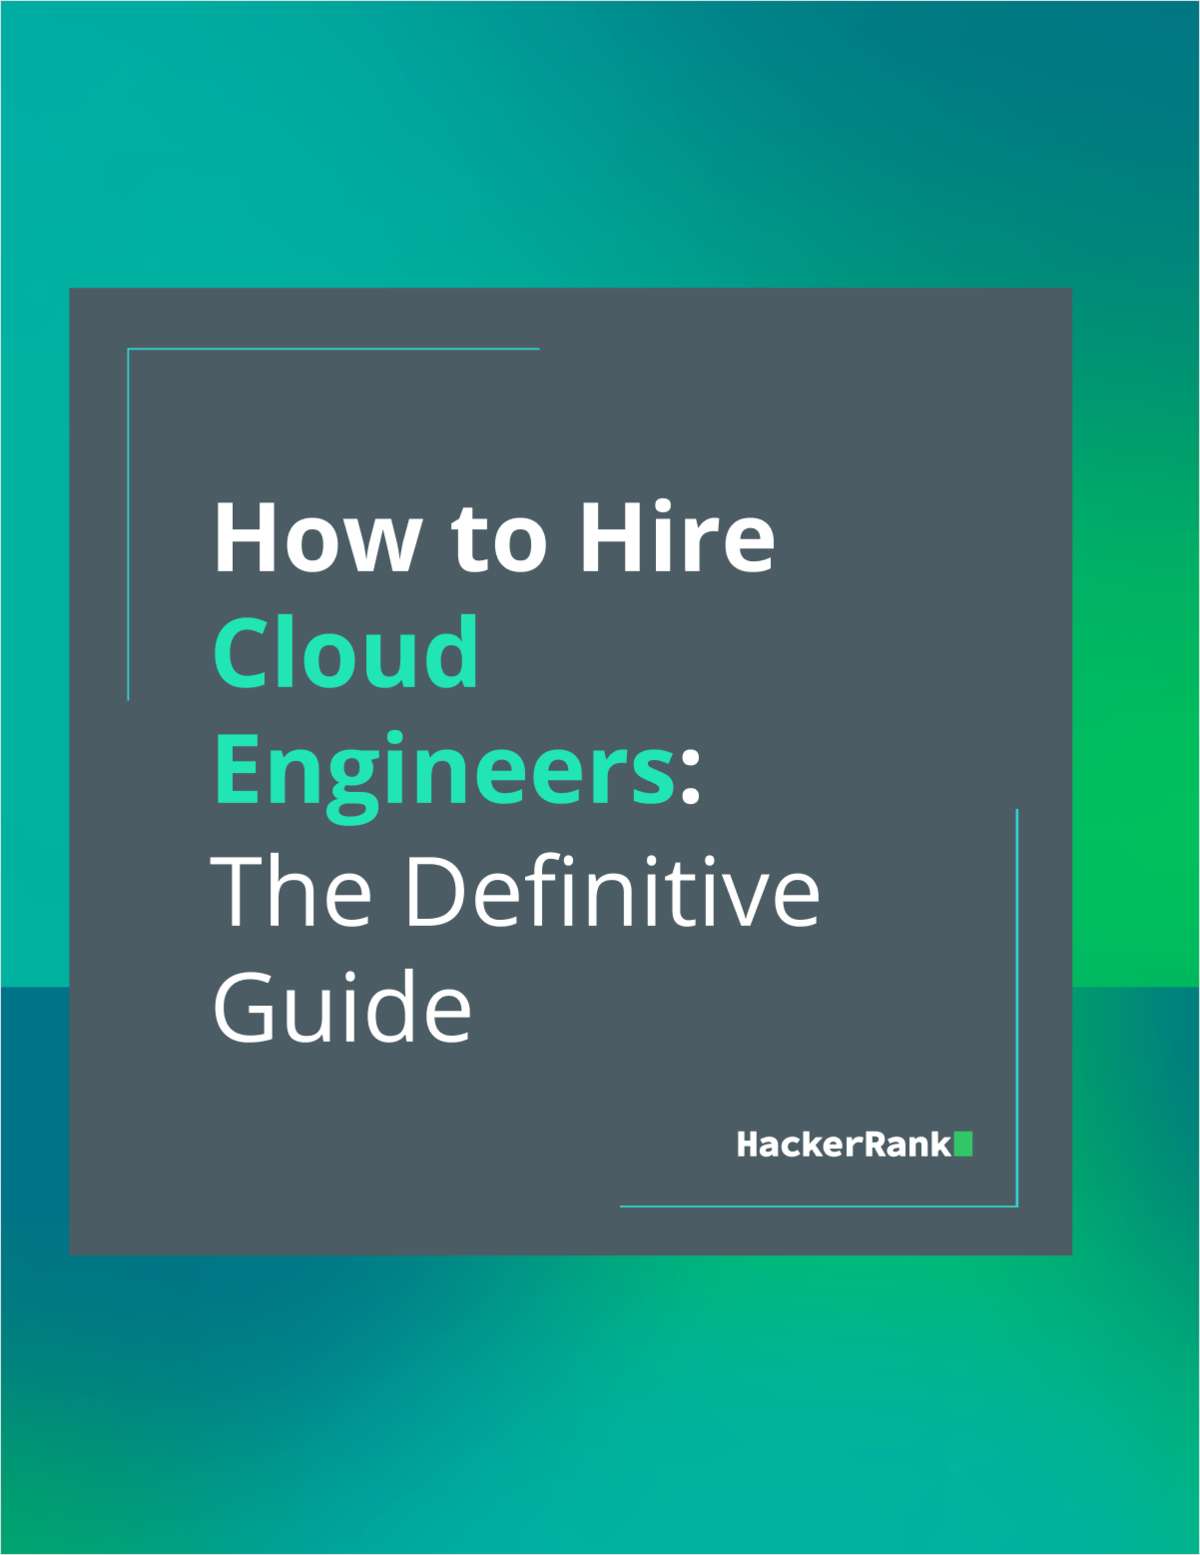 How to Hire Cloud Engineers: The Definitive Guide